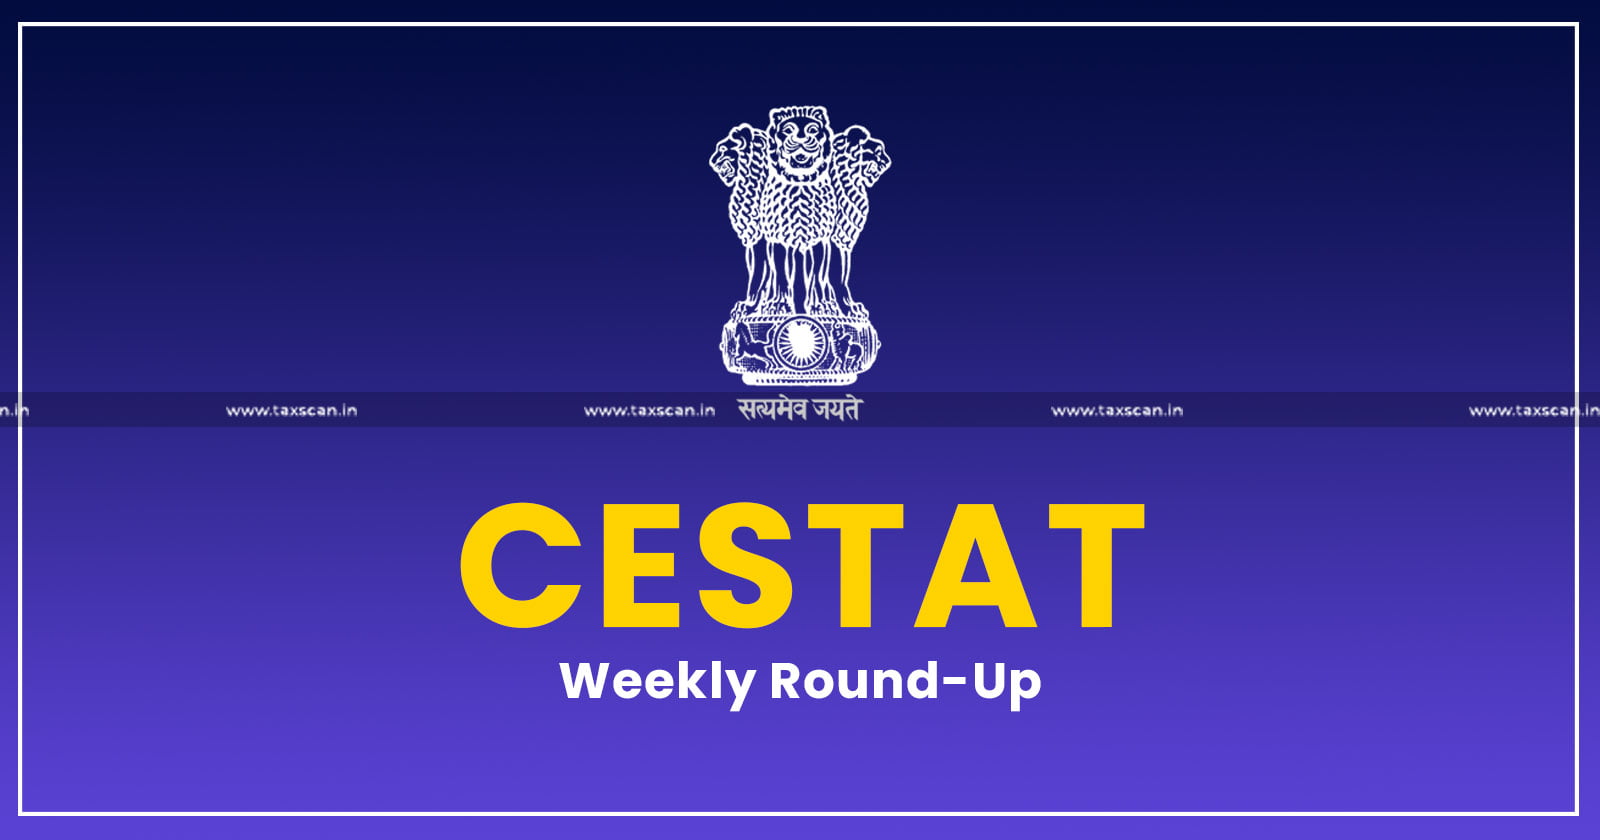 CESTAT - CESTAT Weekly round up - CESTAT Weekly news - Weekly round up - TAXSCAN